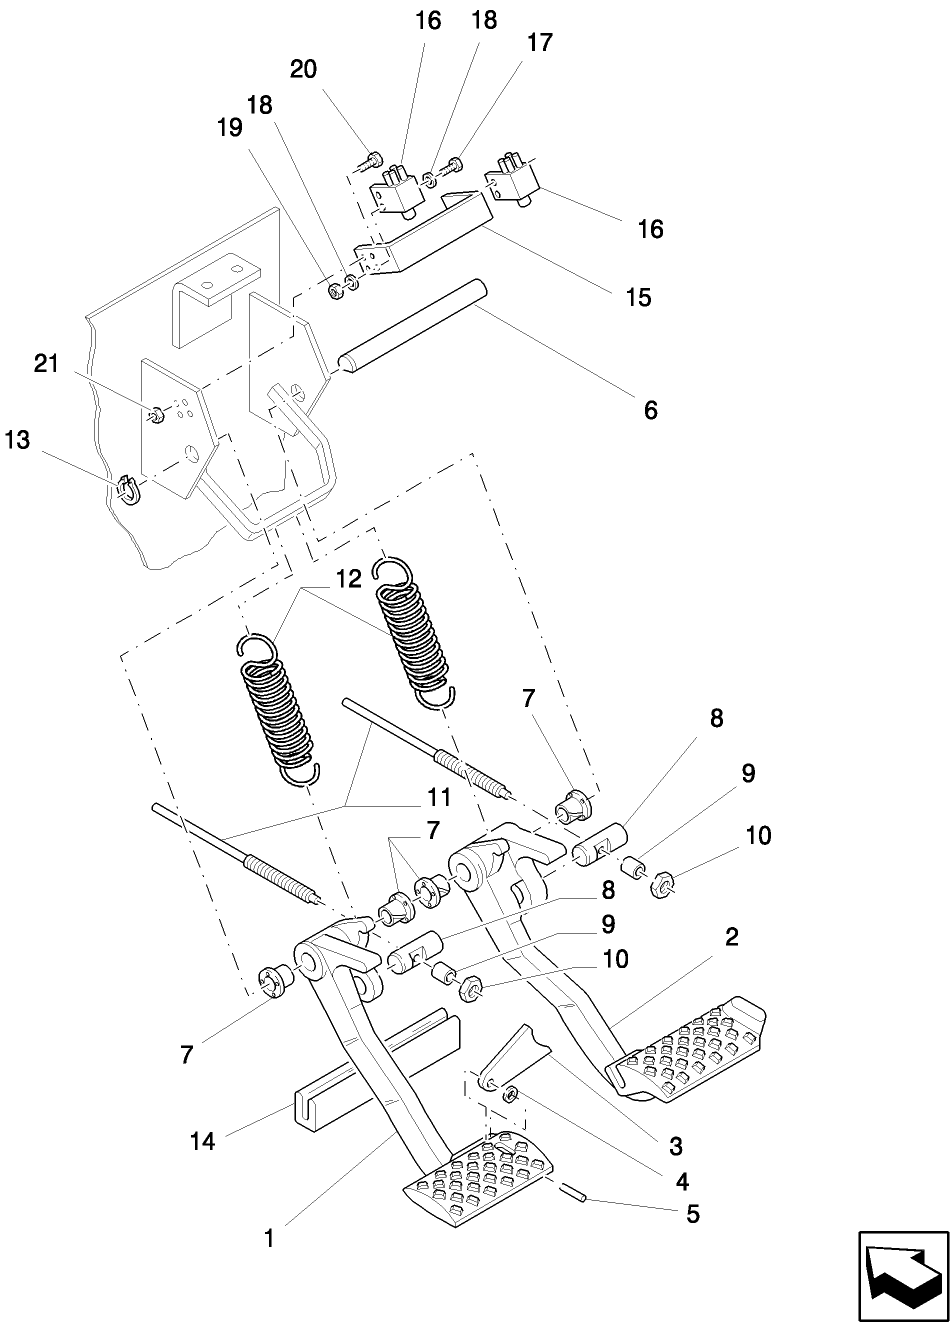 02A01 BRAKE PEDALS & RELATED PARTS